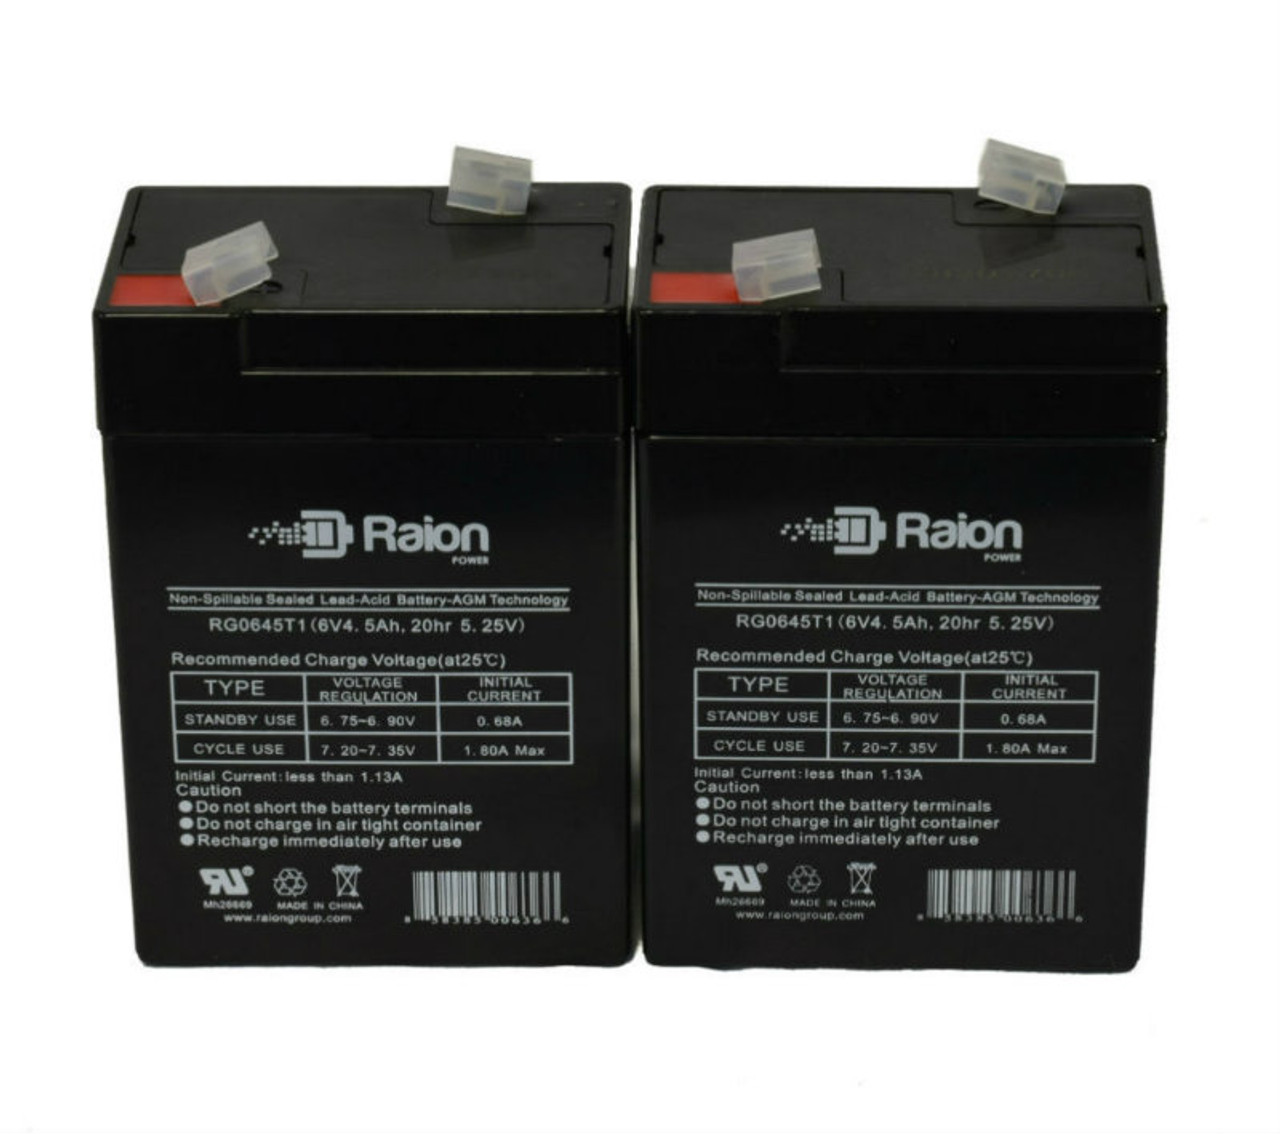 Raion Power RG0645T1 6V 4.5Ah Replacement Medical Equipment Battery for Viasys Healthcare Avian Portable Ventilator - 15365 - 2 Pack